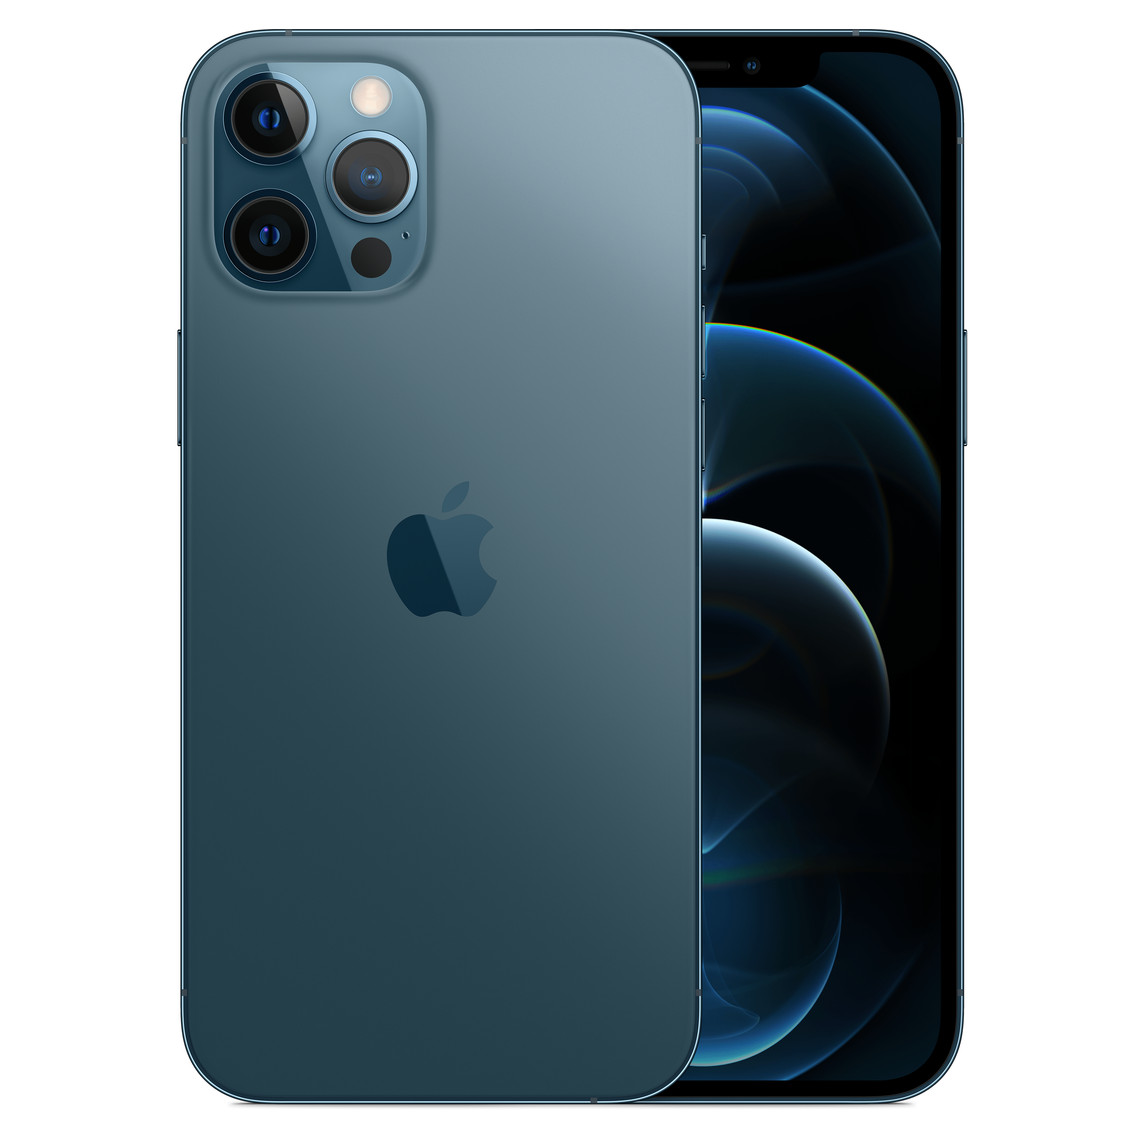 Back, blue iPhone 12 Pro Max, Pro camera system with True Tone flash, microphone. Front, all-screen display